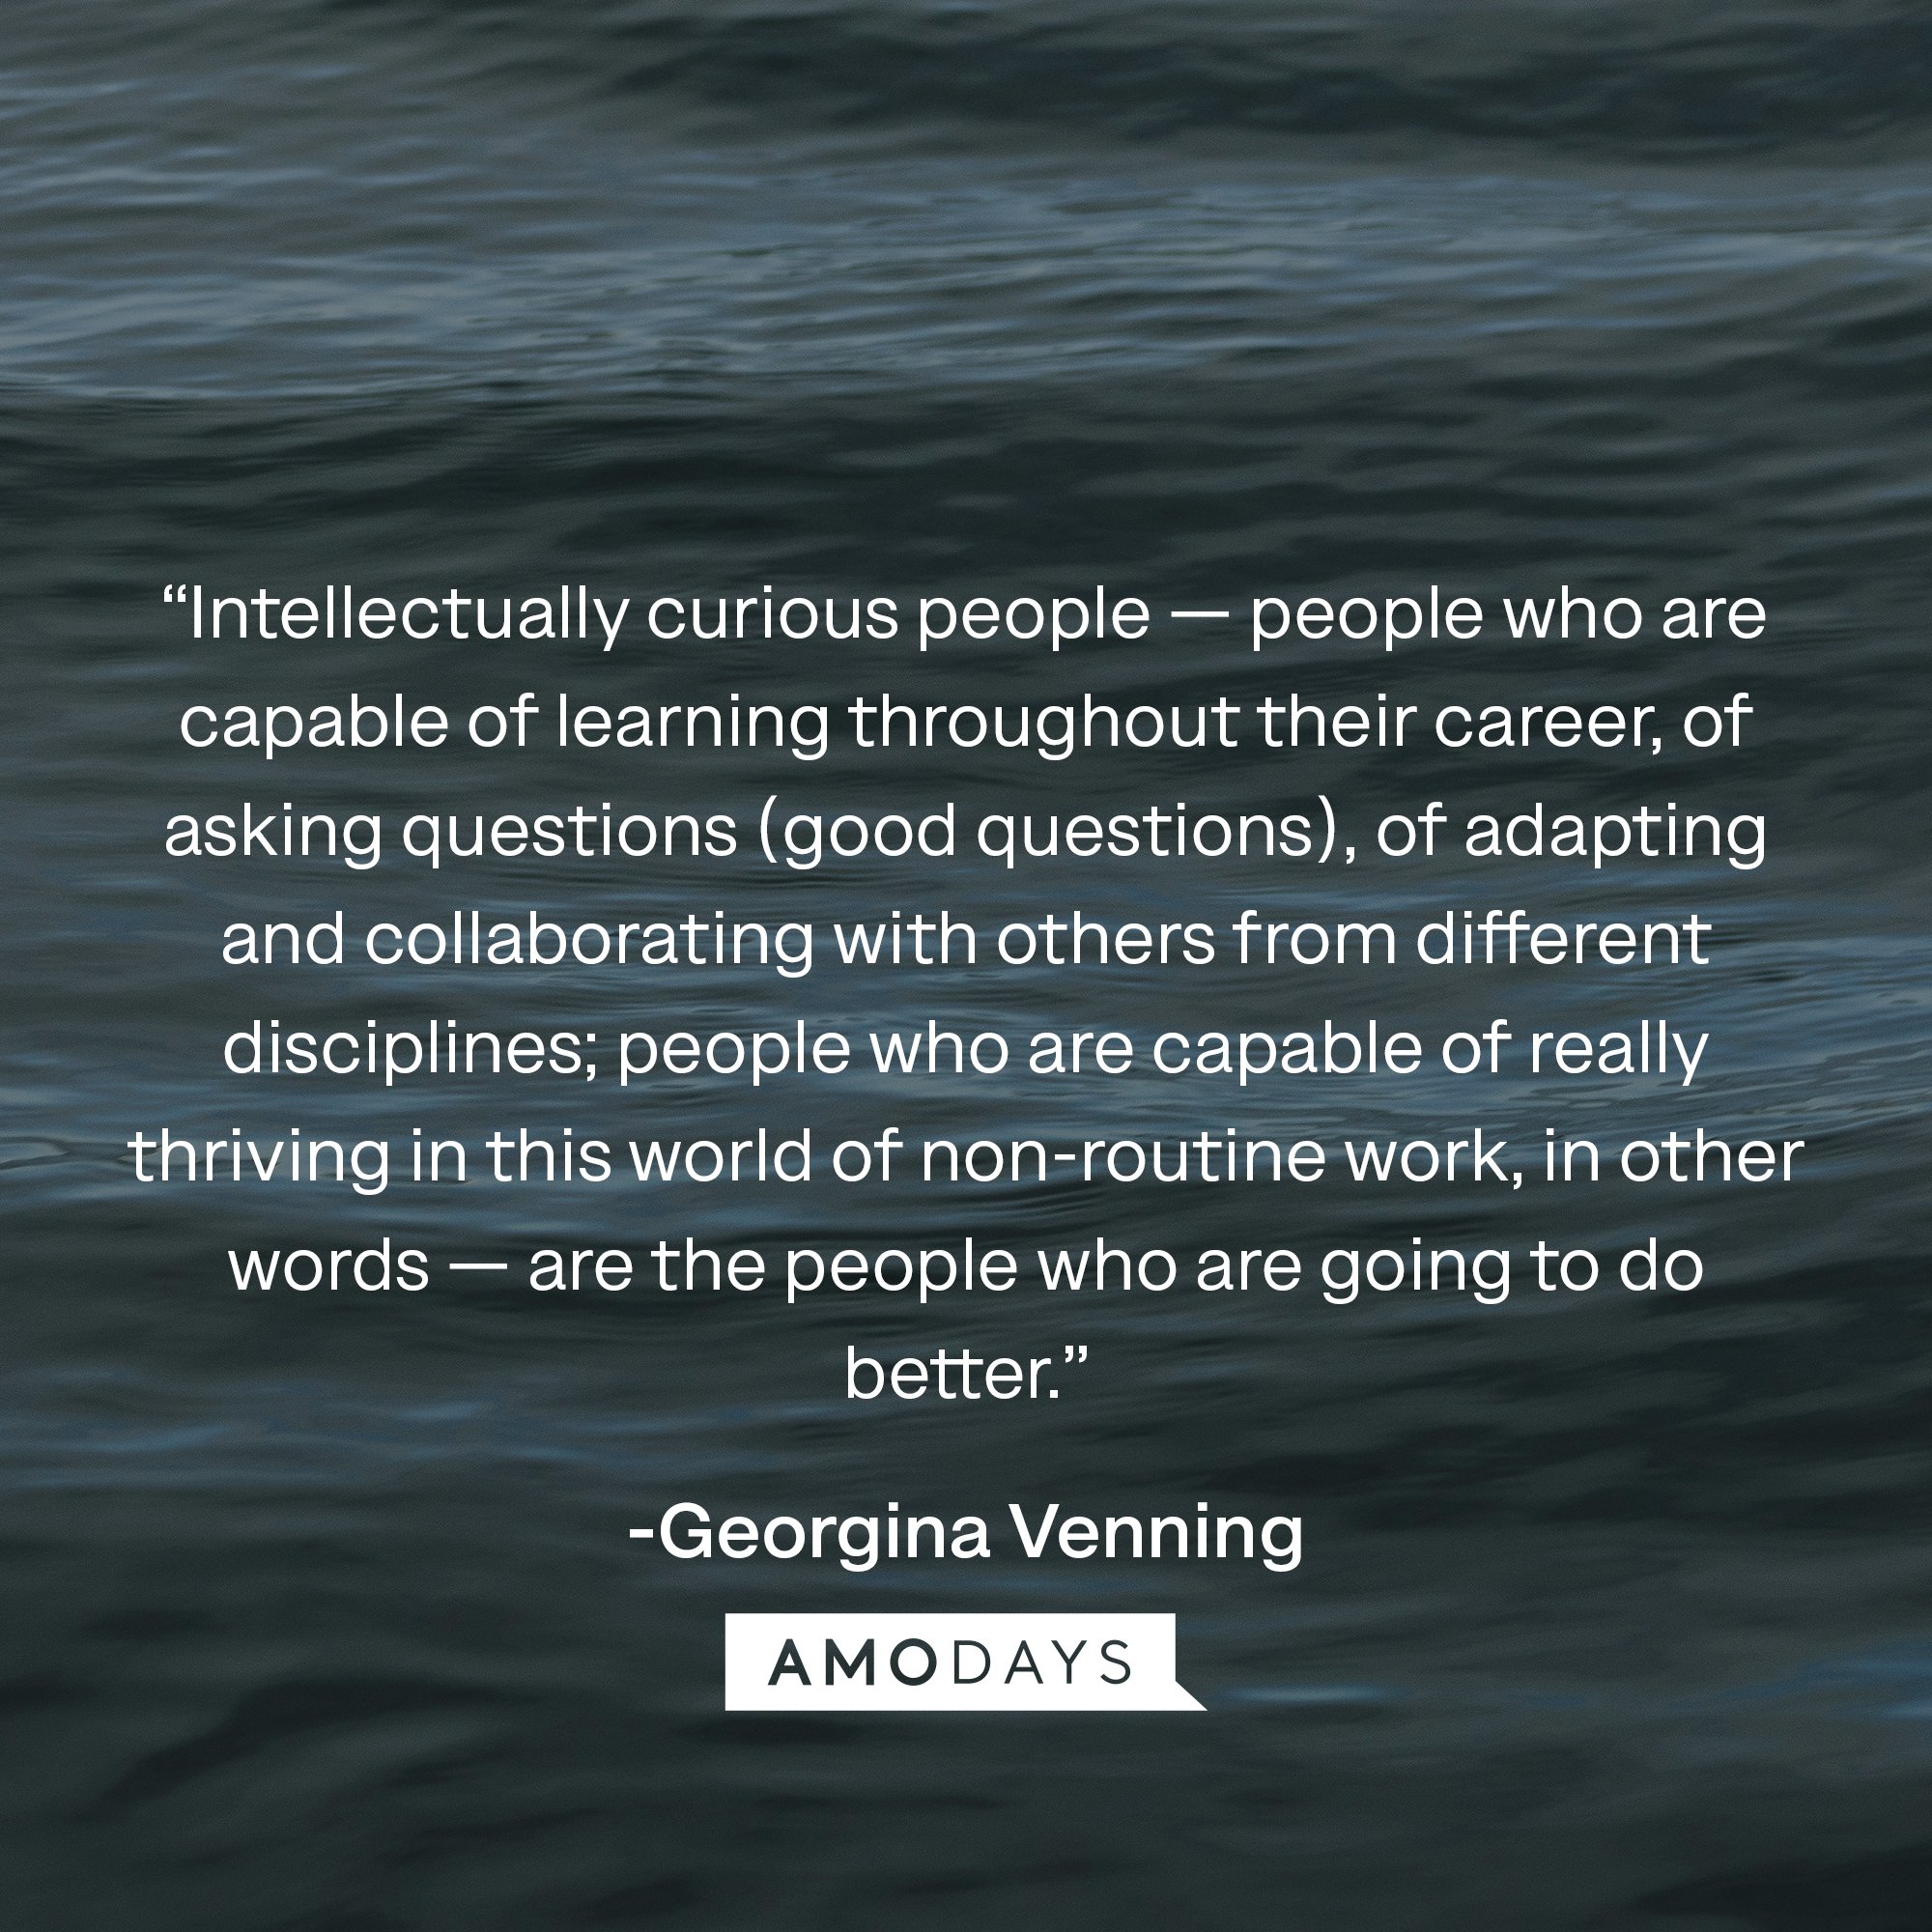  Georgina Venning's quote: “Intellectually curious people — people who are capable of learning throughout their career, of asking questions (good questions), of adapting and collaborating with others from different disciplines; people who are capable of really thriving in this world of non-routine work, in other words — are the people who are going to do better.” | Image: AmoDays